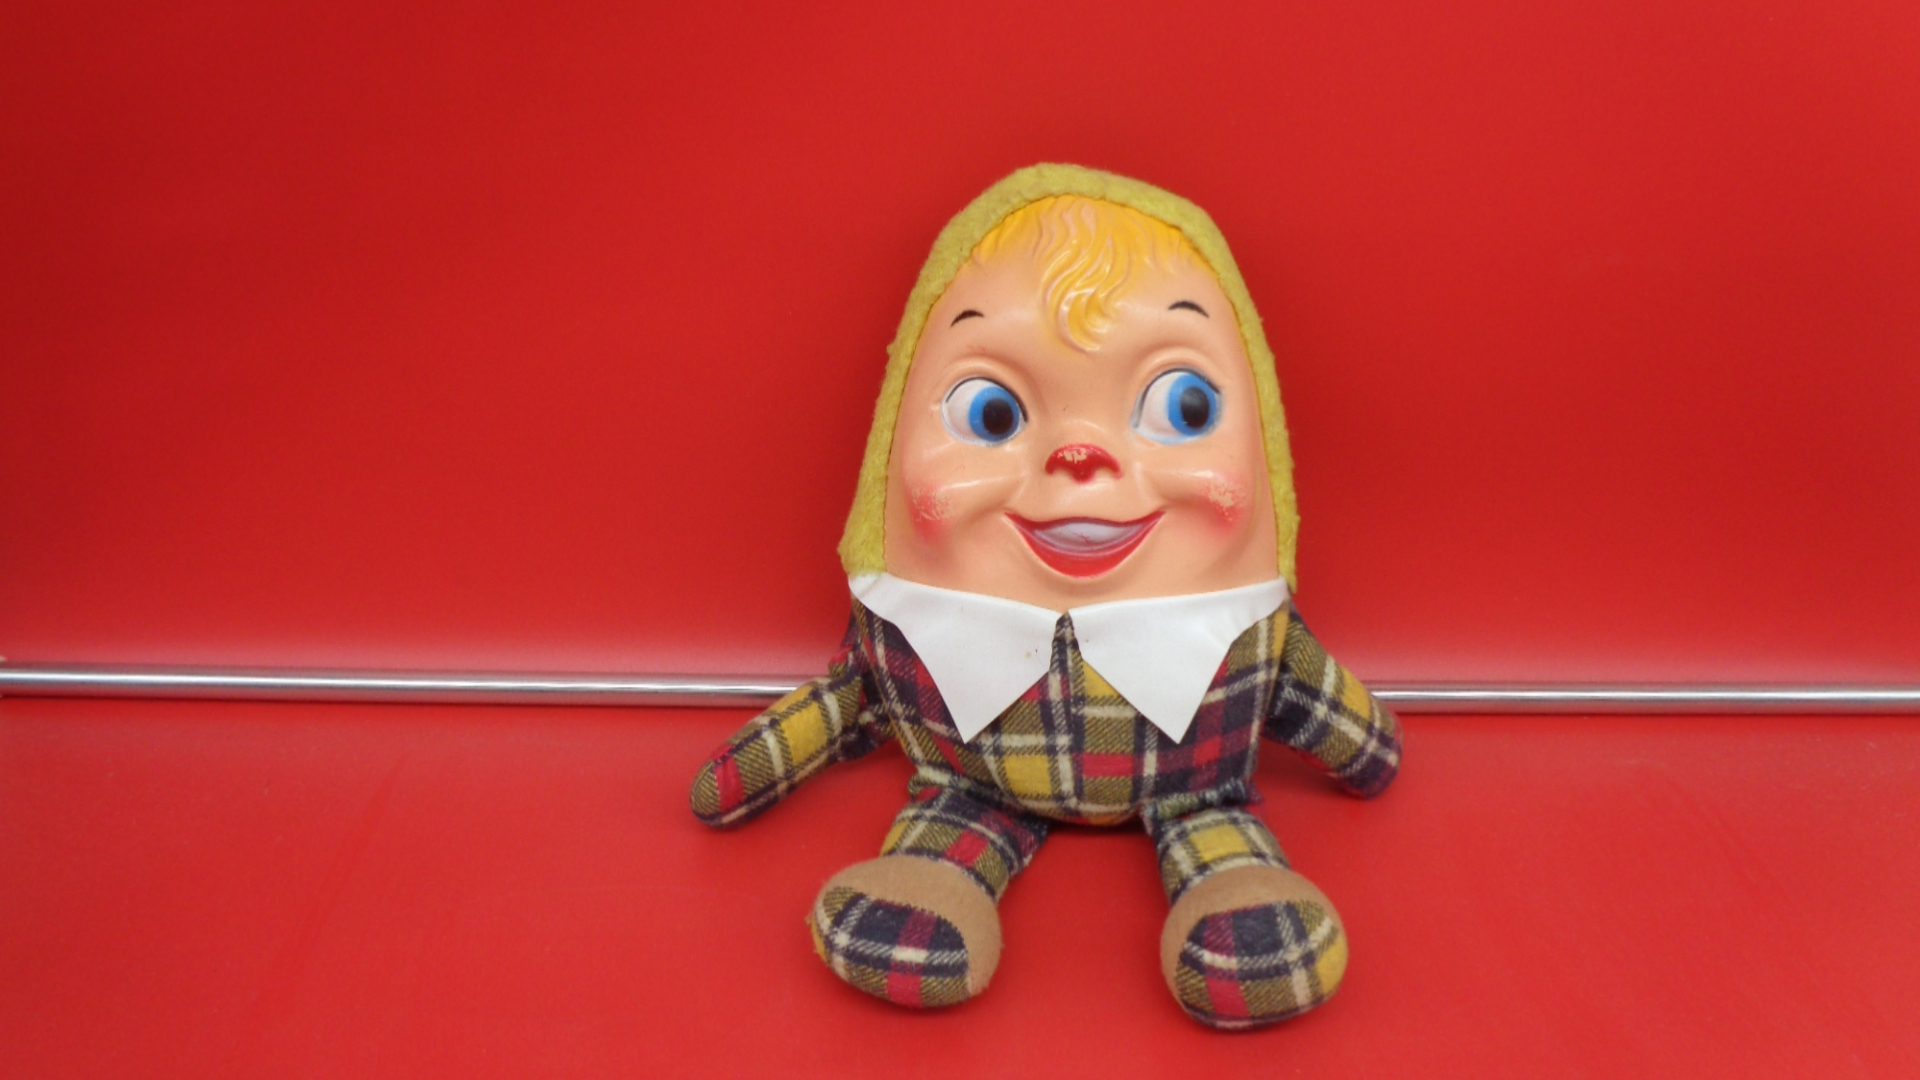 Display of front view of Plush Humpty Dumpty Doll